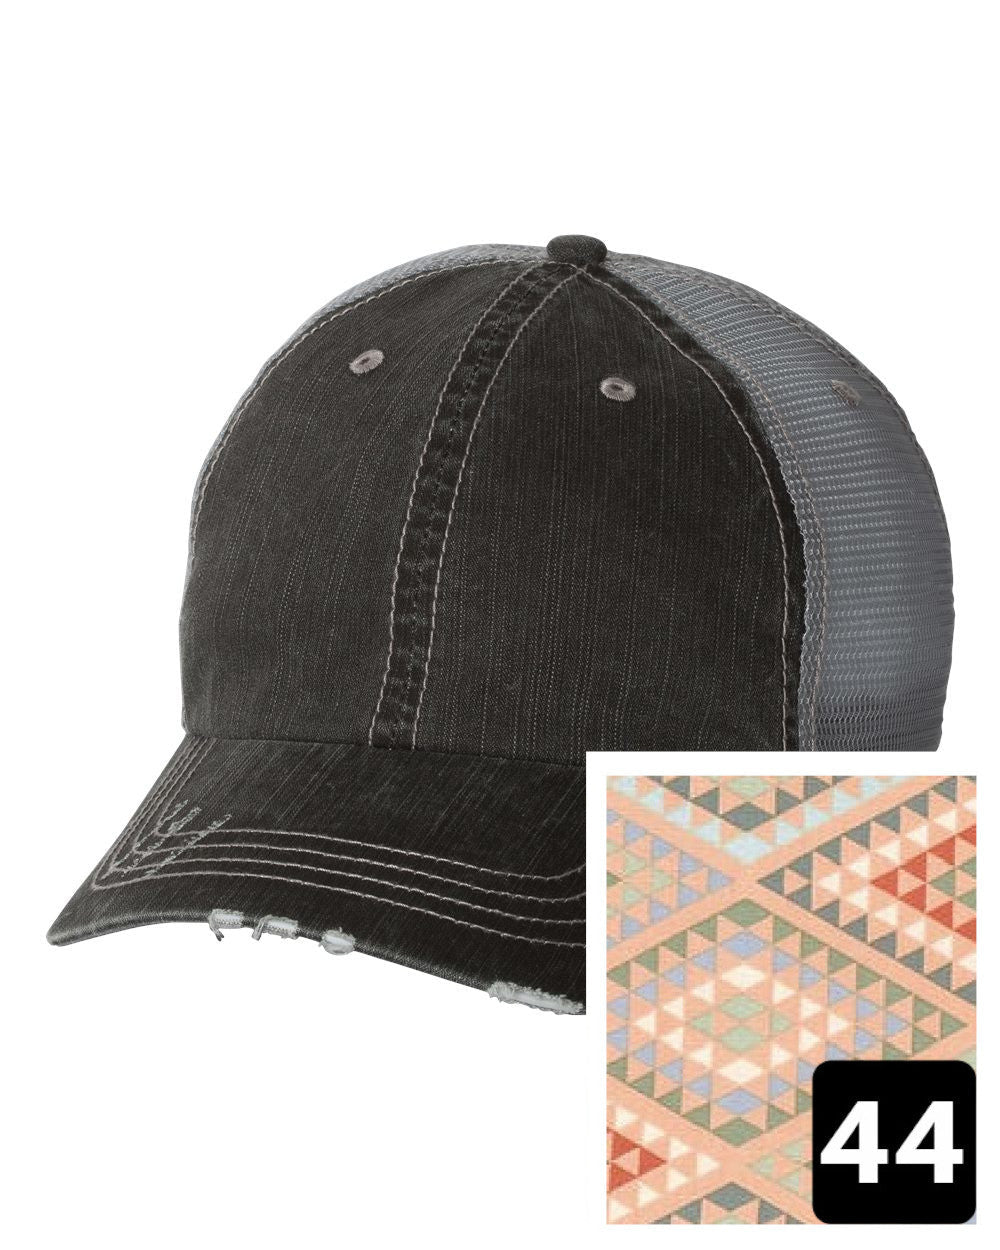 gray distressed trucker hat with navy coral and white chevron fabric state of Nebraska